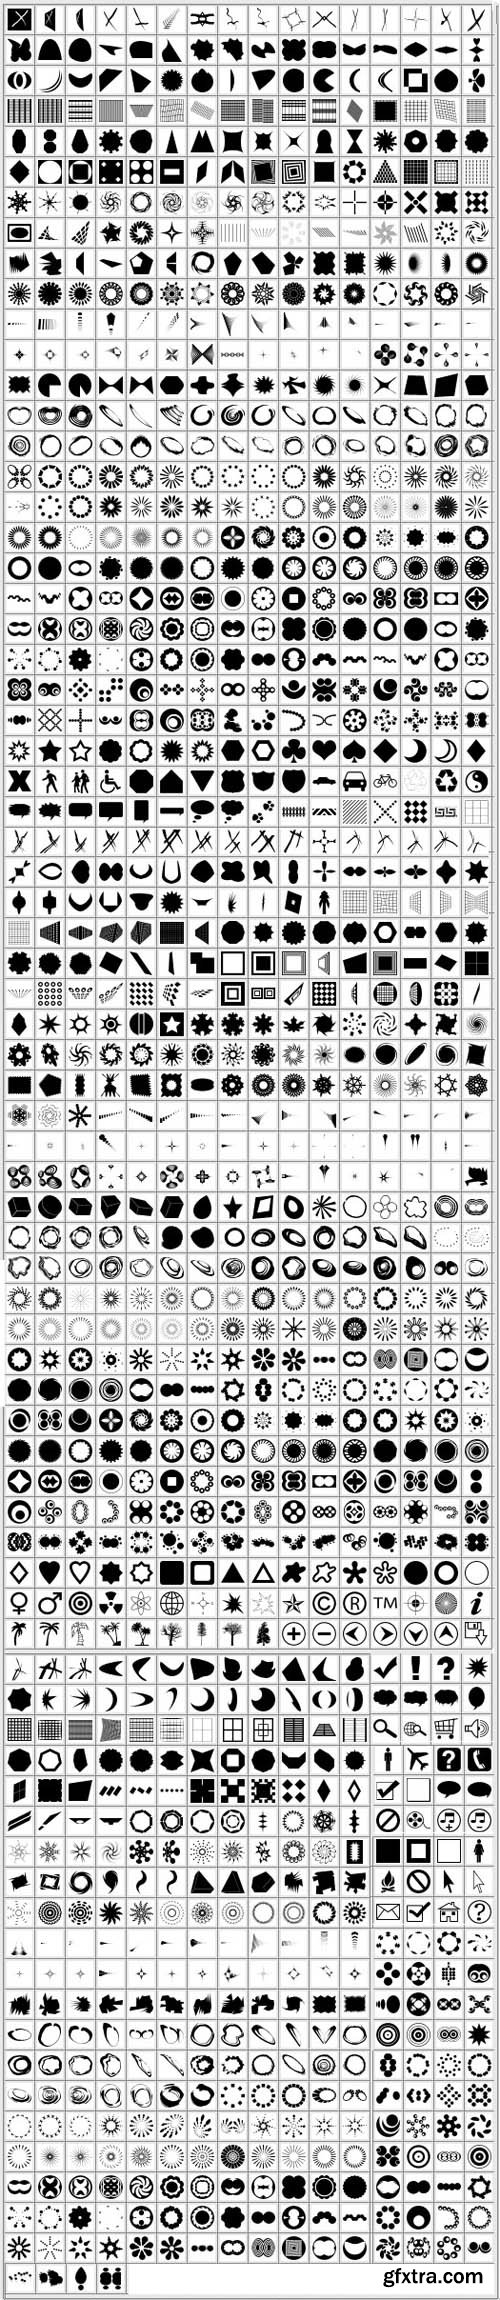 1192 Custom Shapes Huge Collection for Photoshop